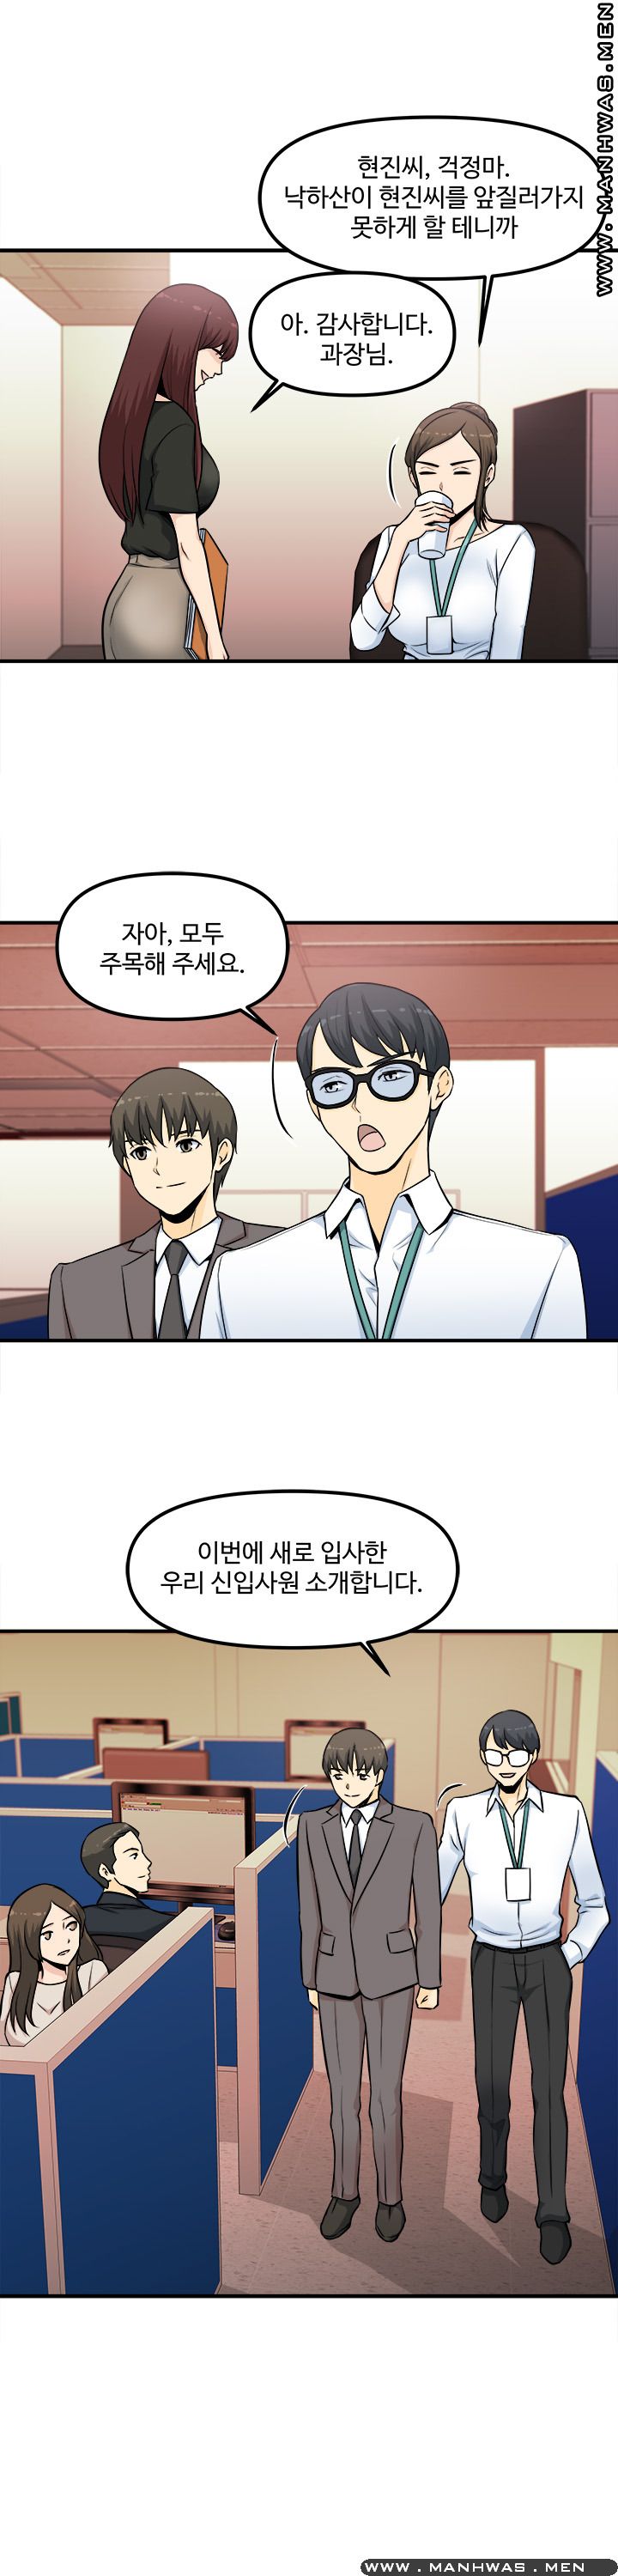 Office Bible Raw - Chapter 1 Page 23